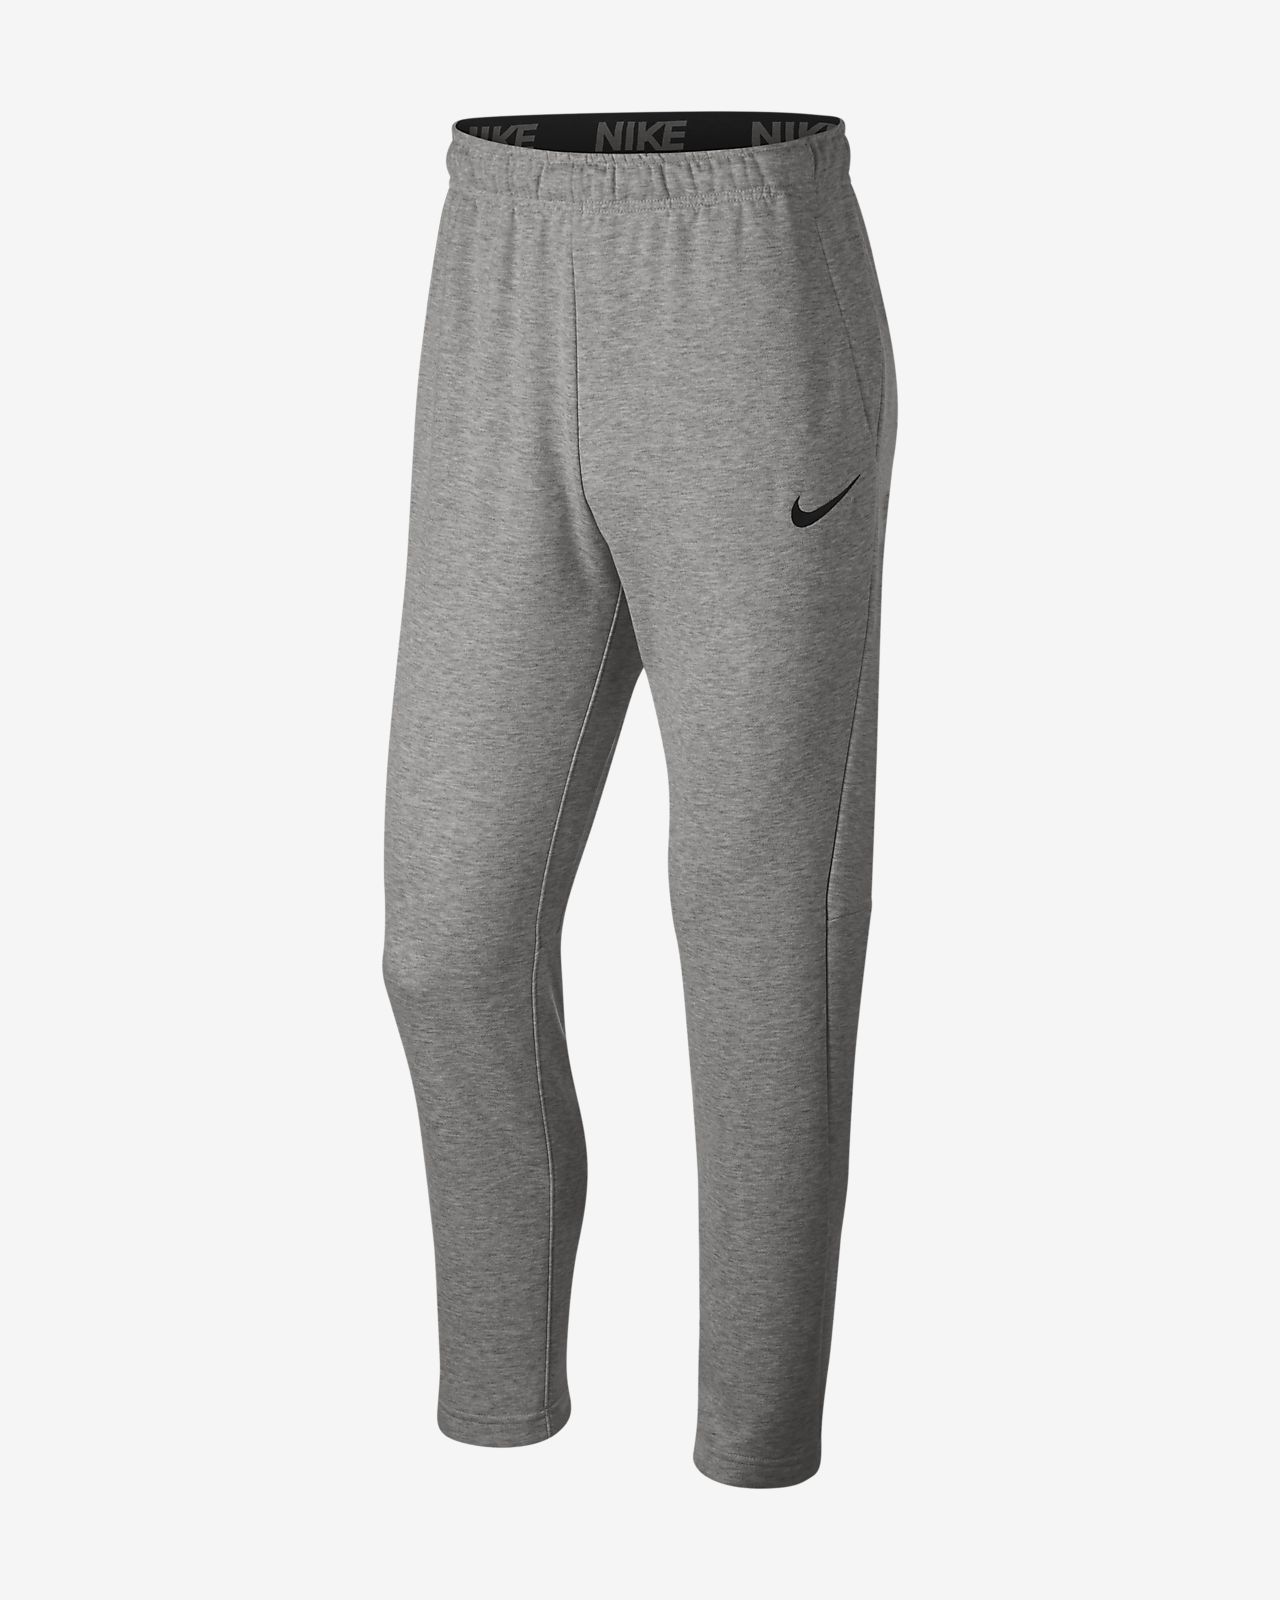 Nike Therma Fit Pants Size Chart